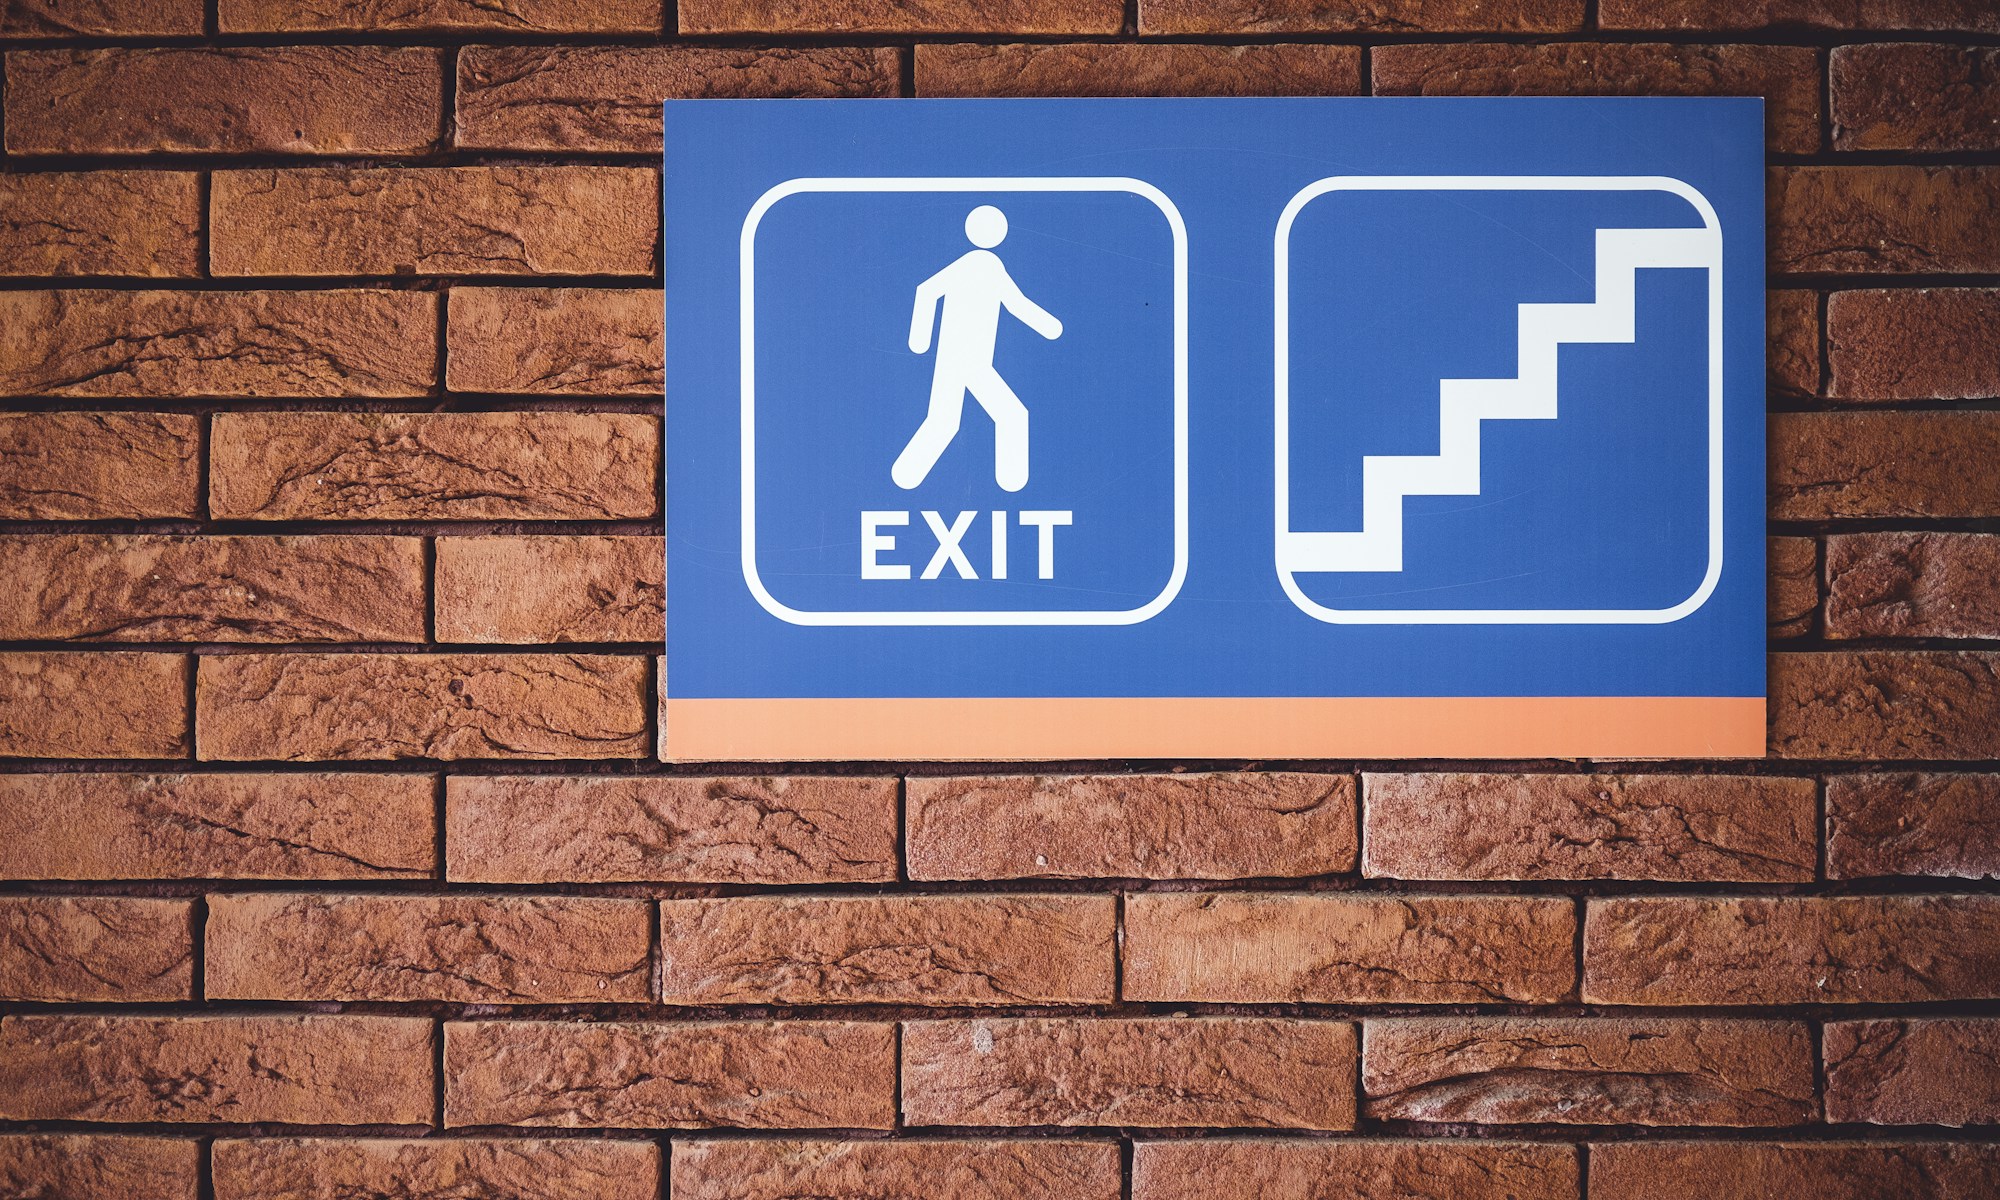 blue and white exit signage mounted on brown brick wall